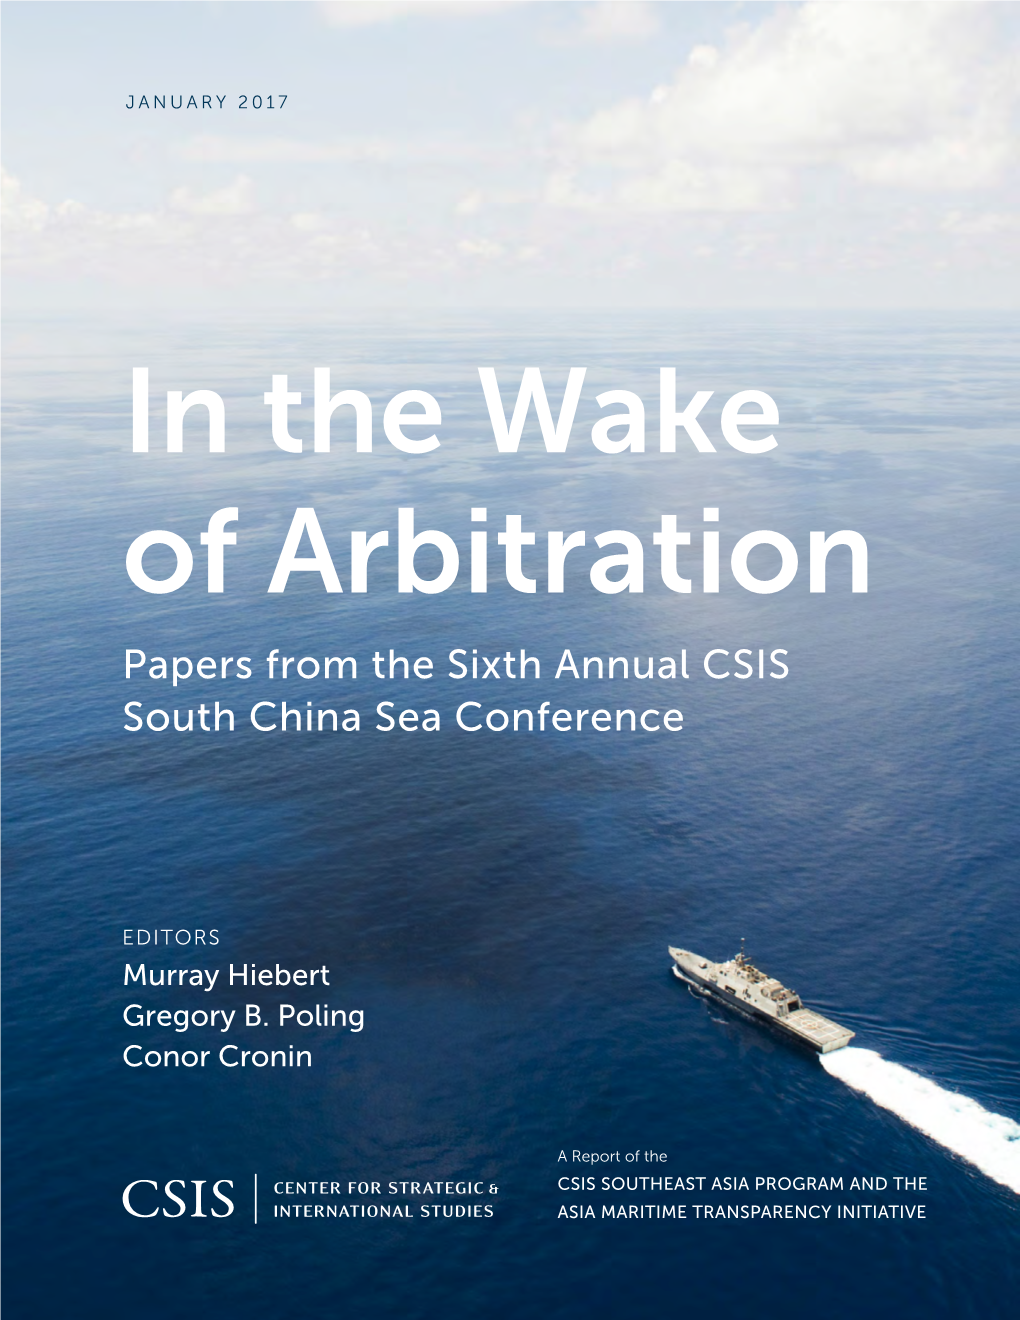 In the Wake of Arbitration: Papers from the Sixth Annual CSIS South China